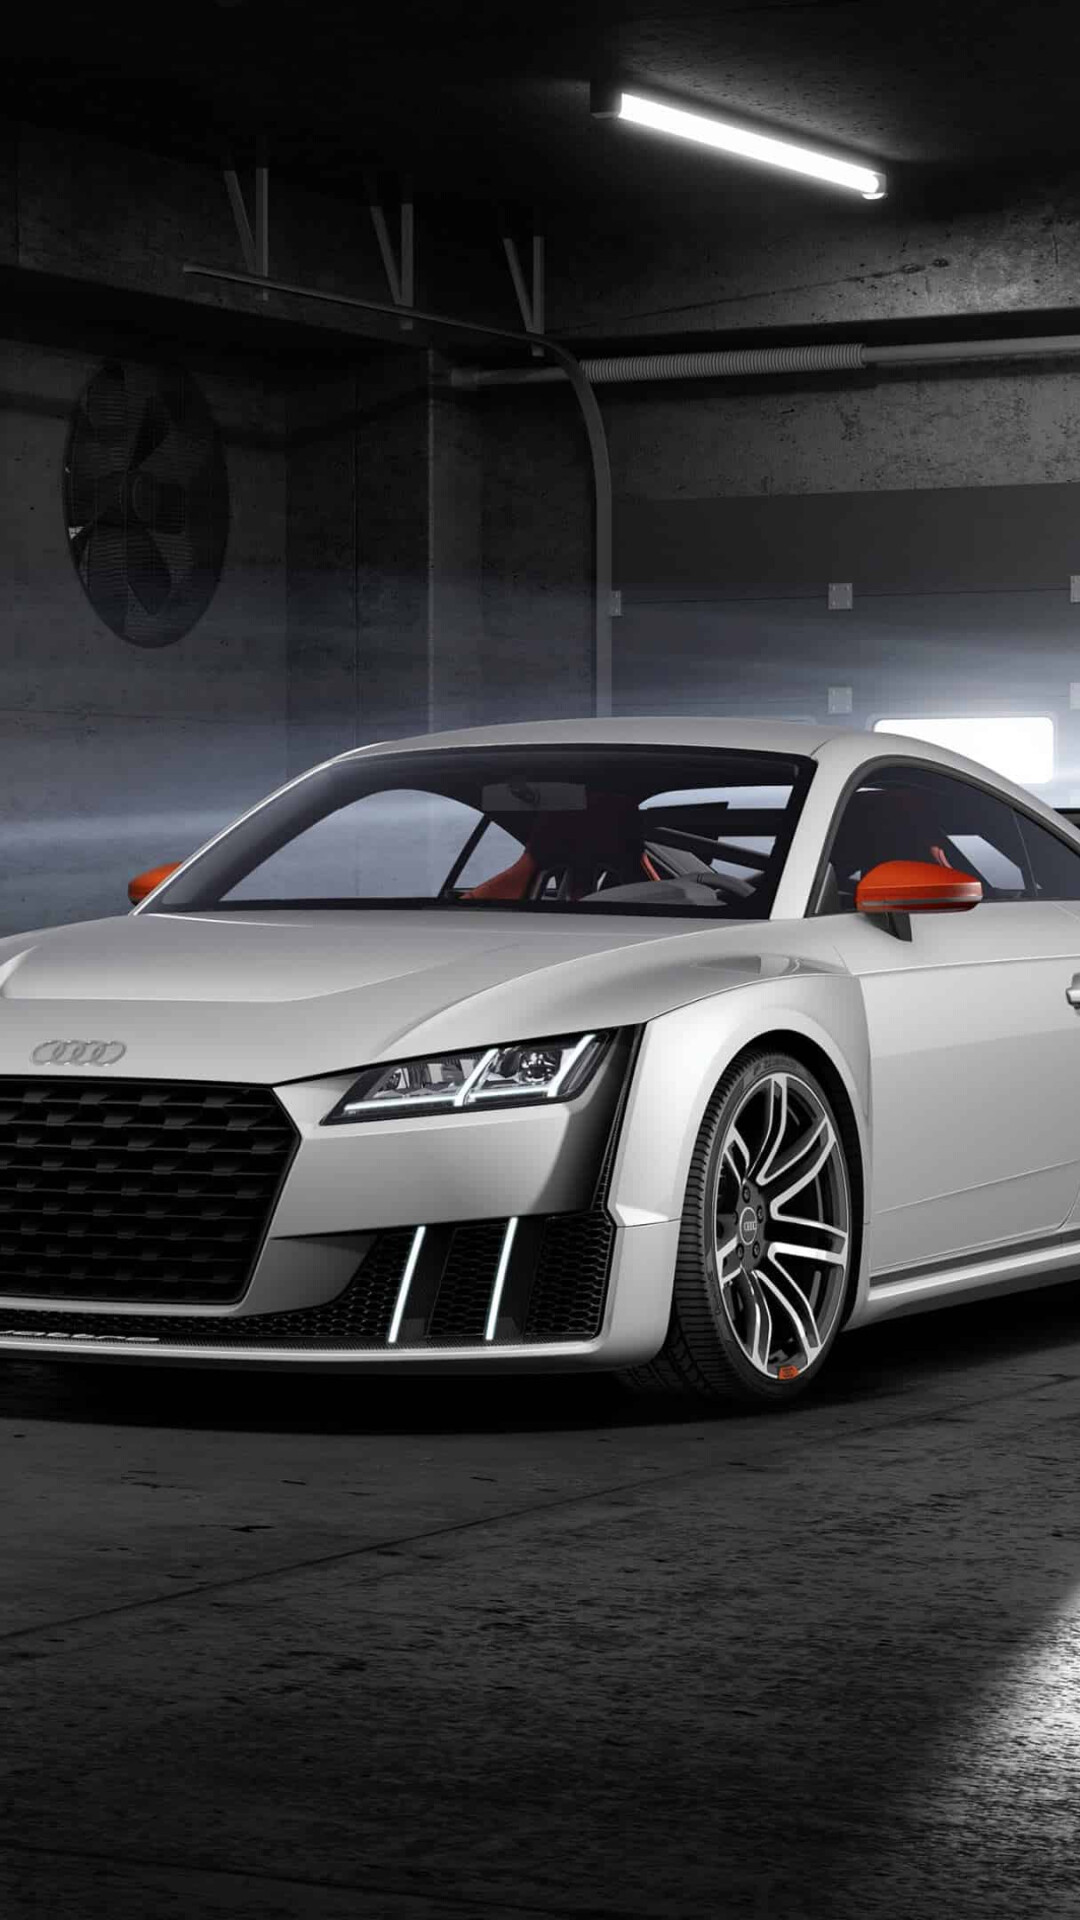 Audi: One of three best-selling luxury automakers in the world. 1080x1920 Full HD Background.